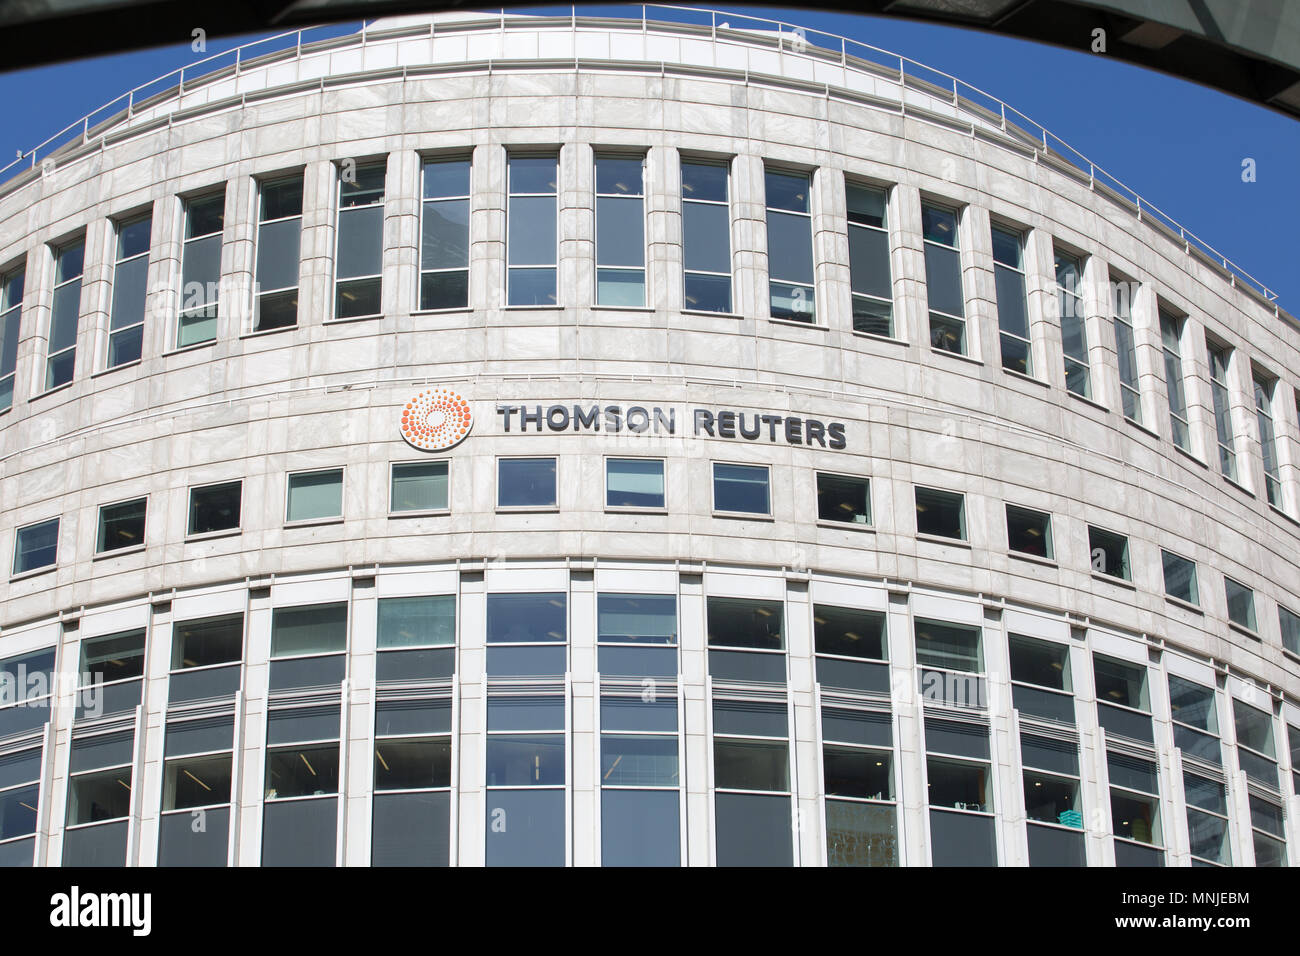 Thomson Reuters offices in Canary Wharf, London Stock Photo